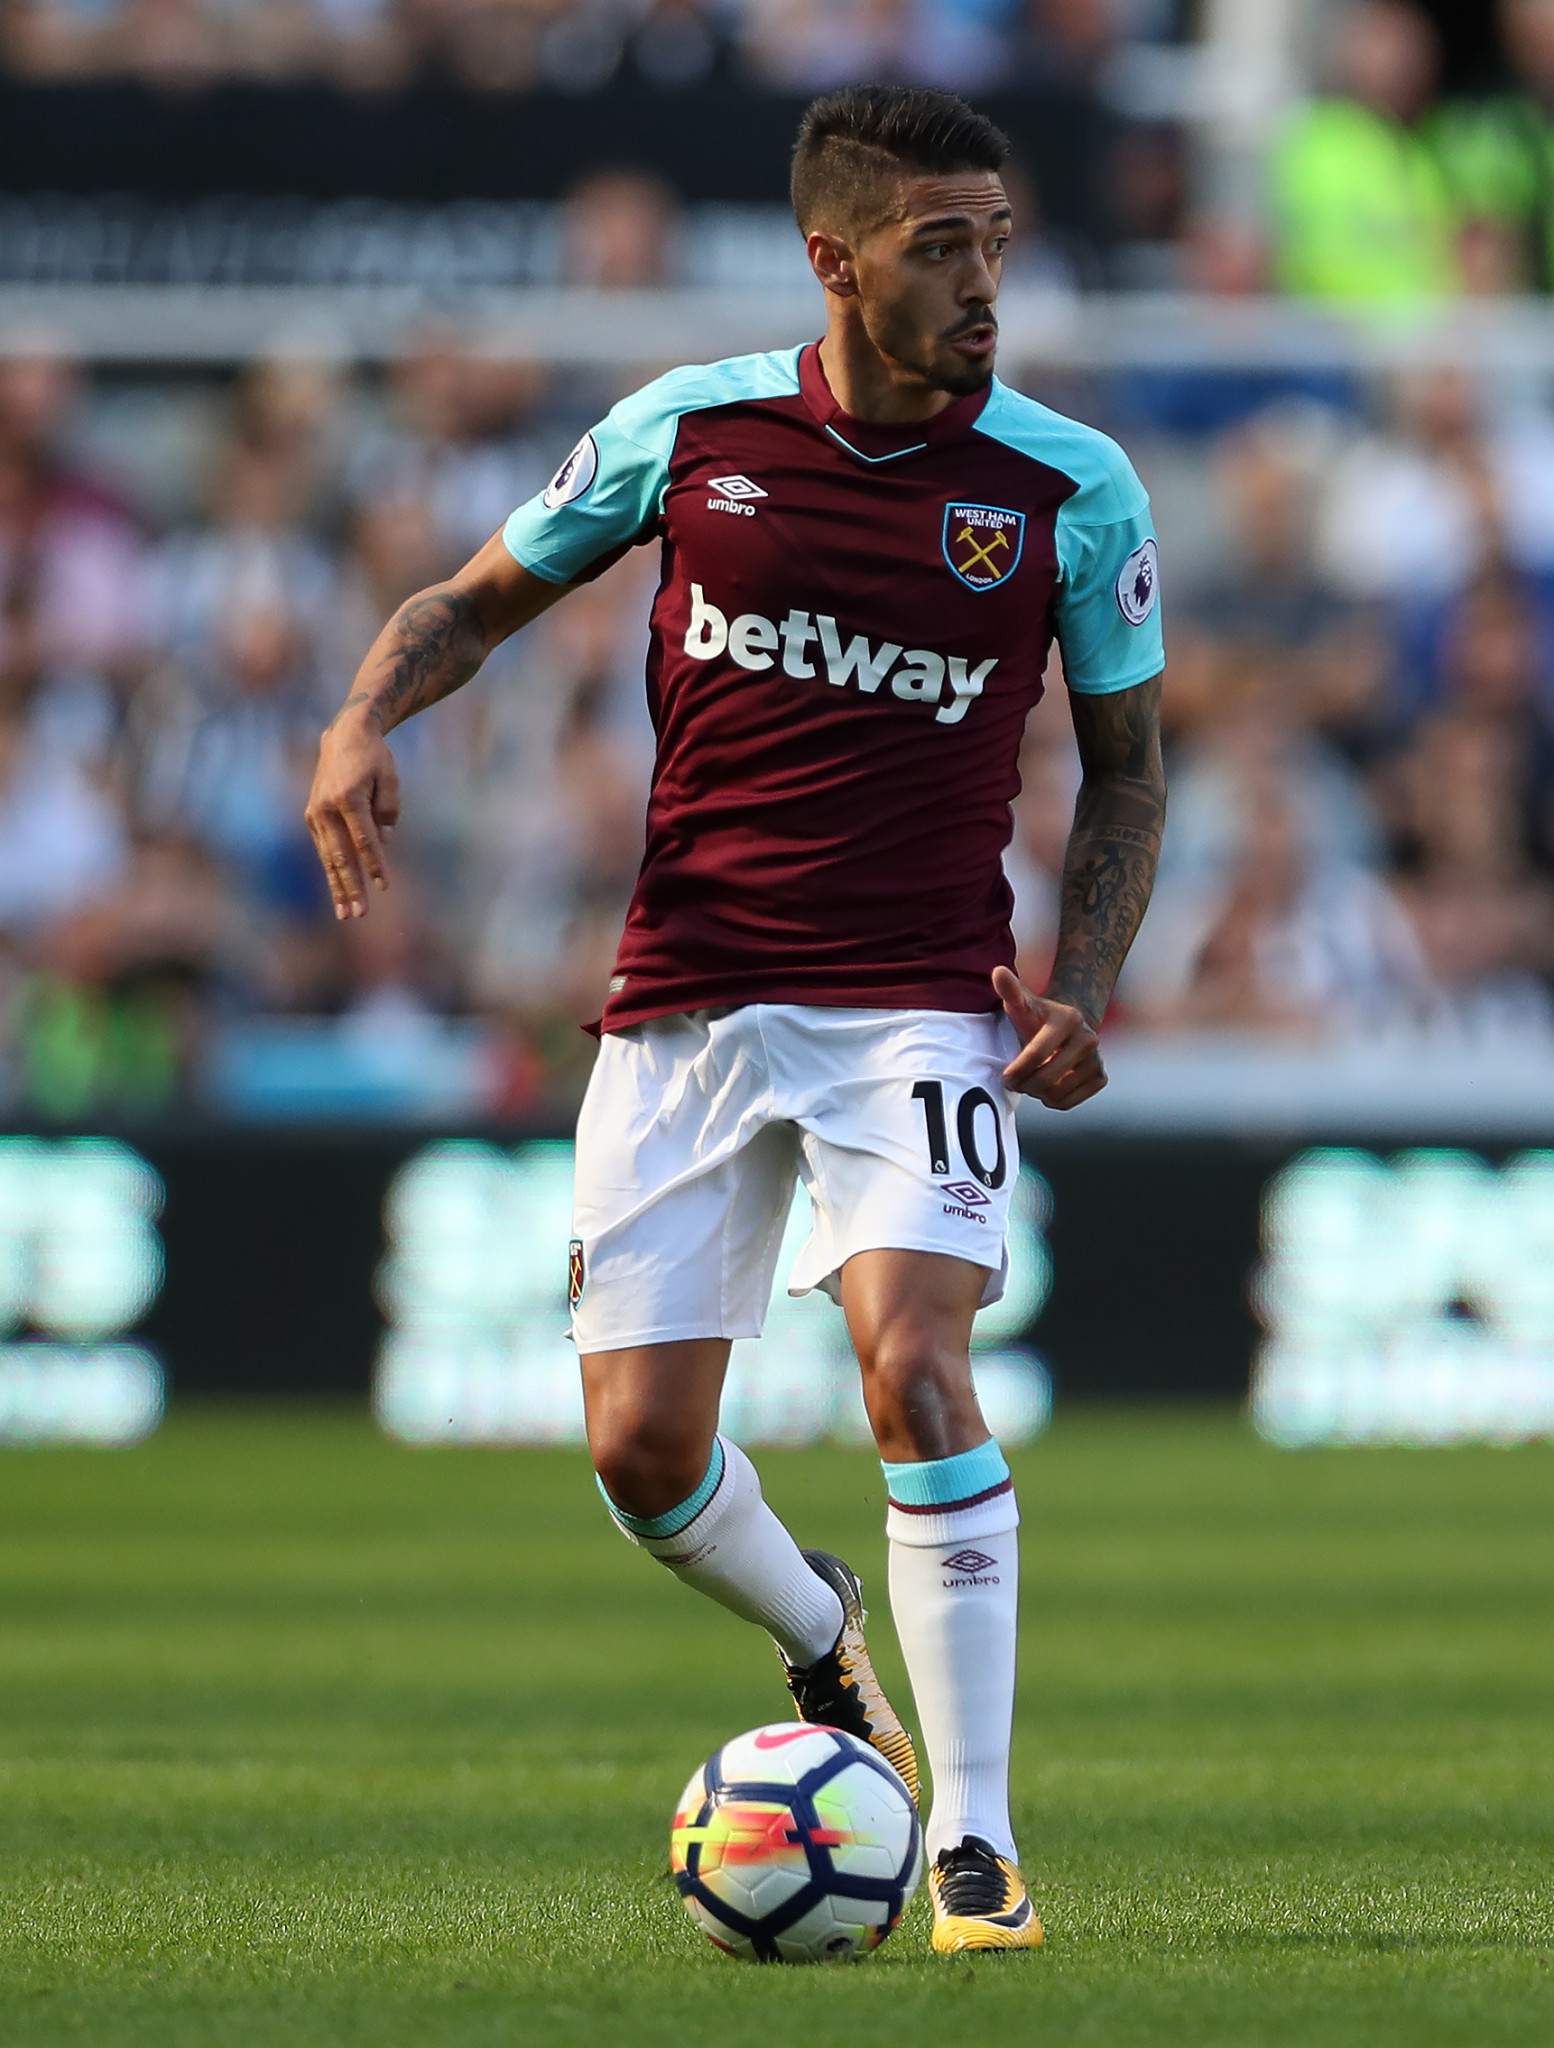 It used to be Dagenham Motors. Now it is betway on the front of the West Ham shirt. But for how much longer? ©Getty Images